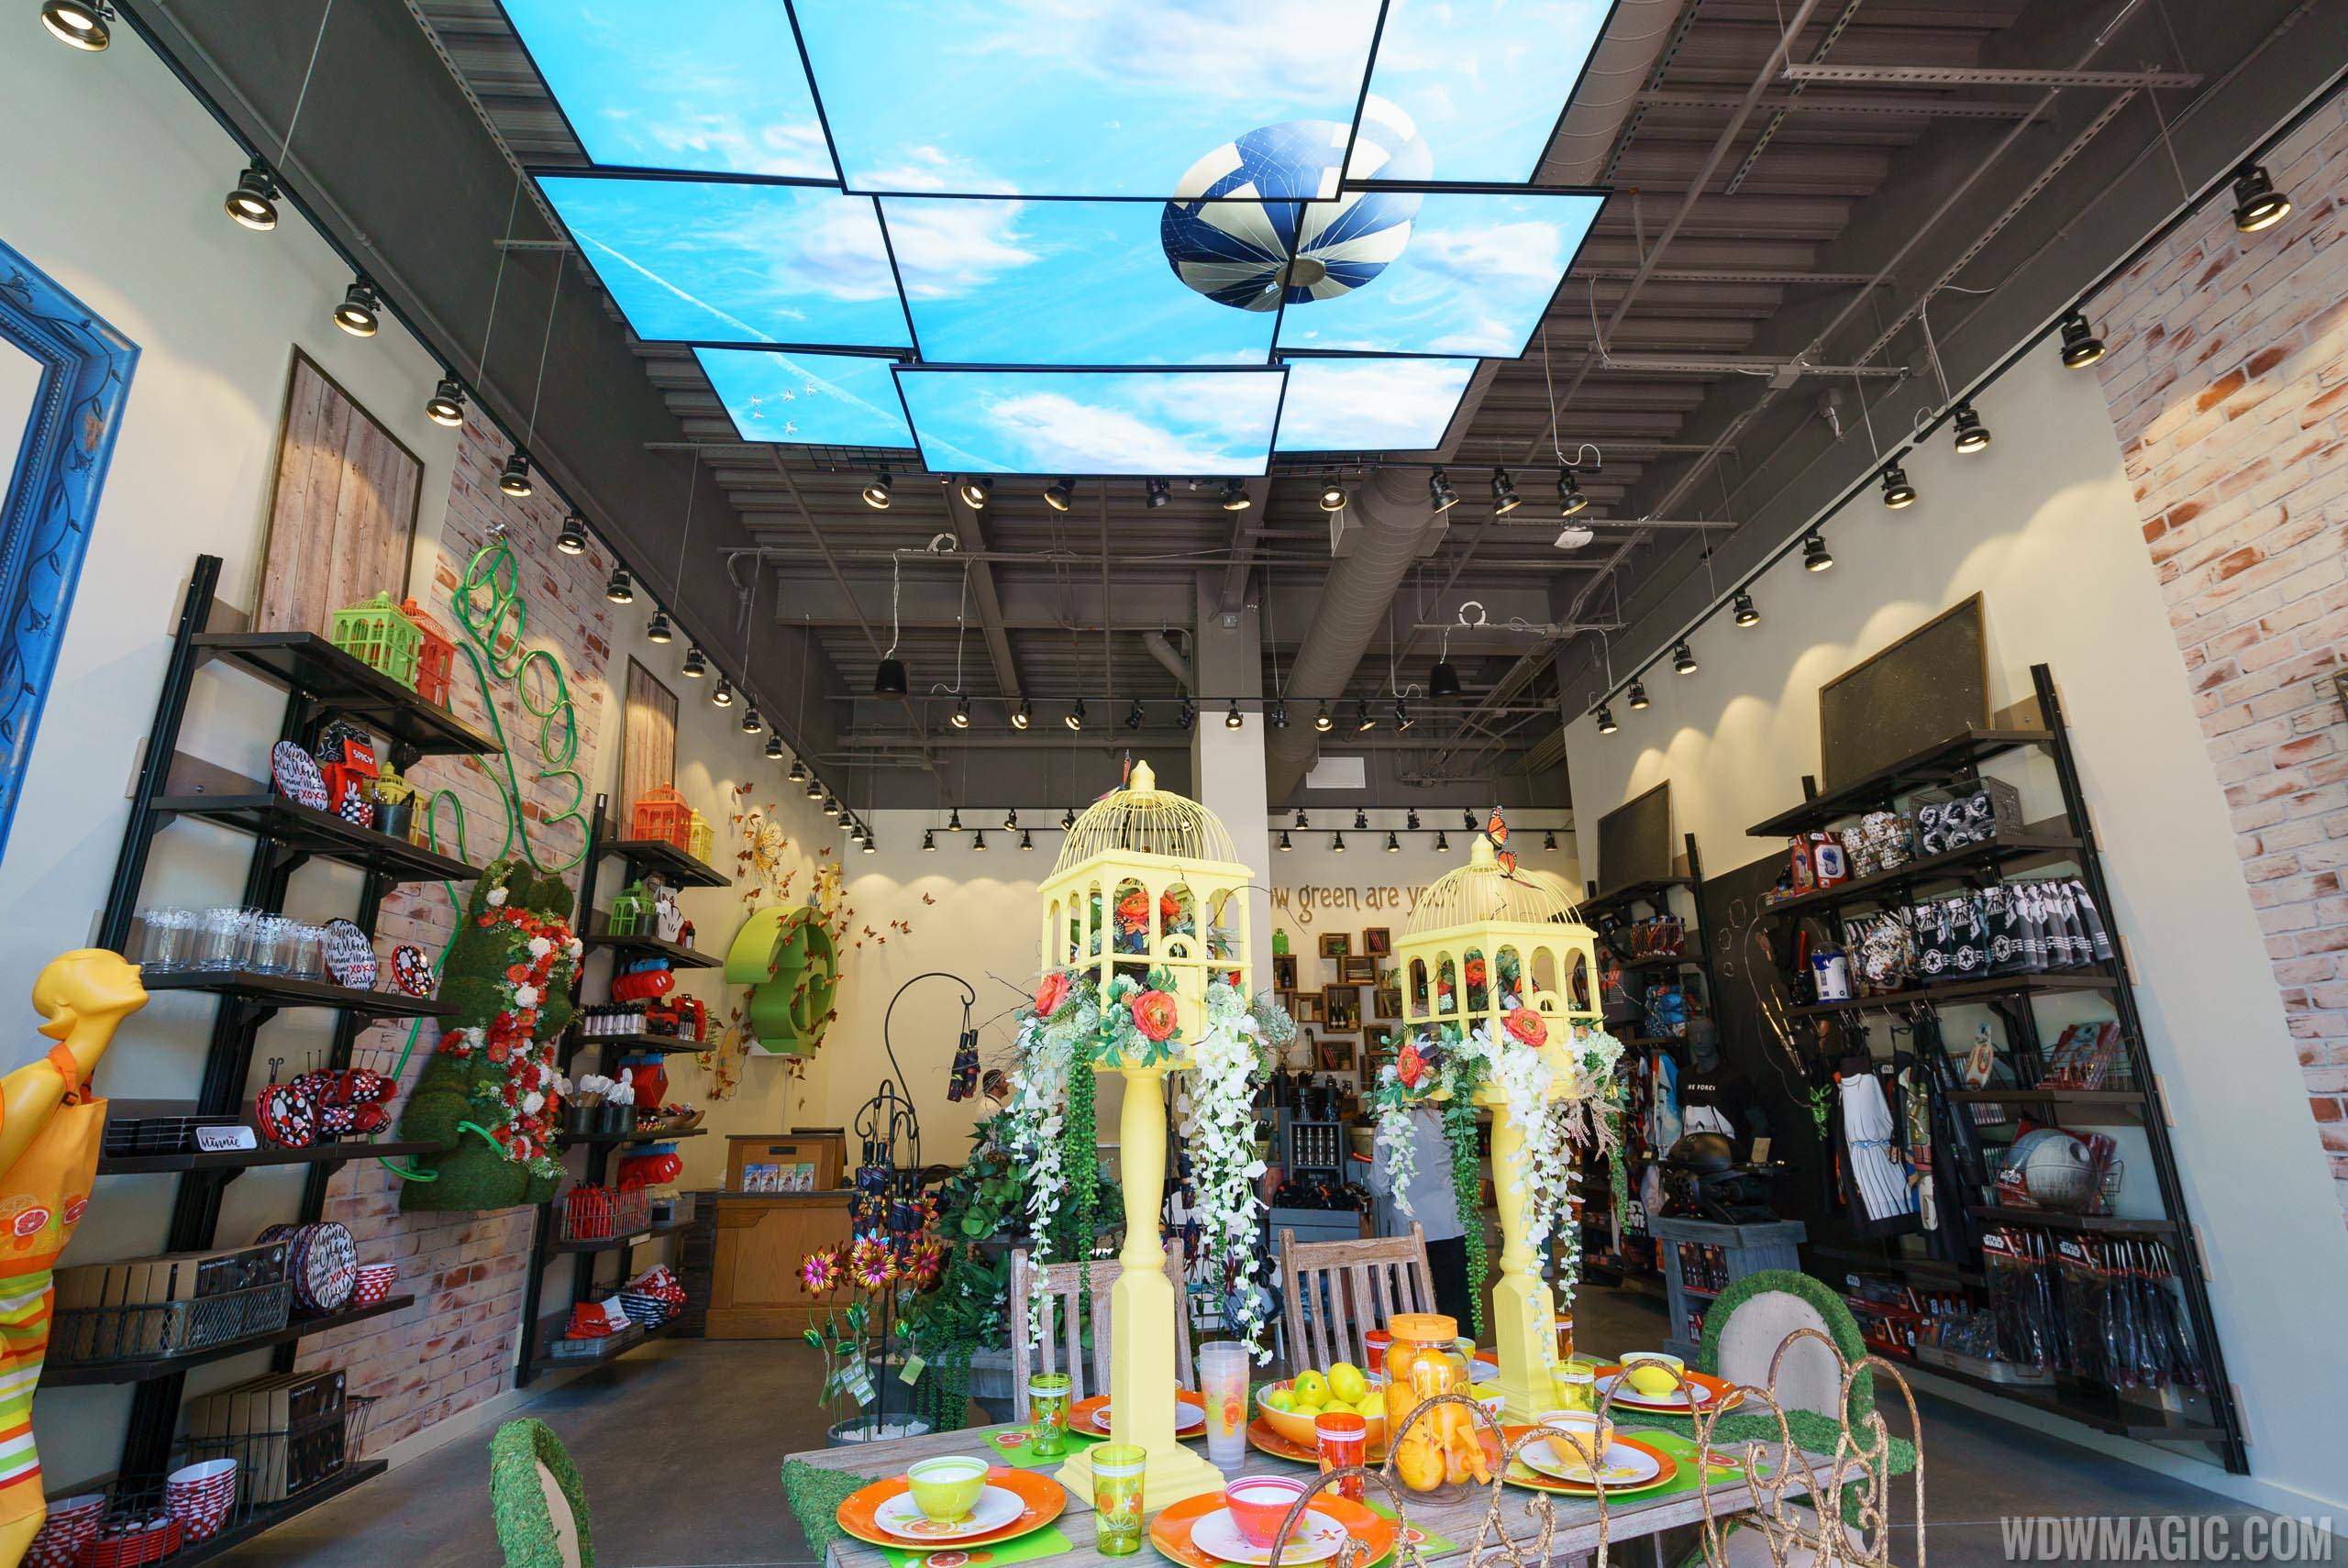 PHOTOS - D-Living reopens with new summer outdoors theme